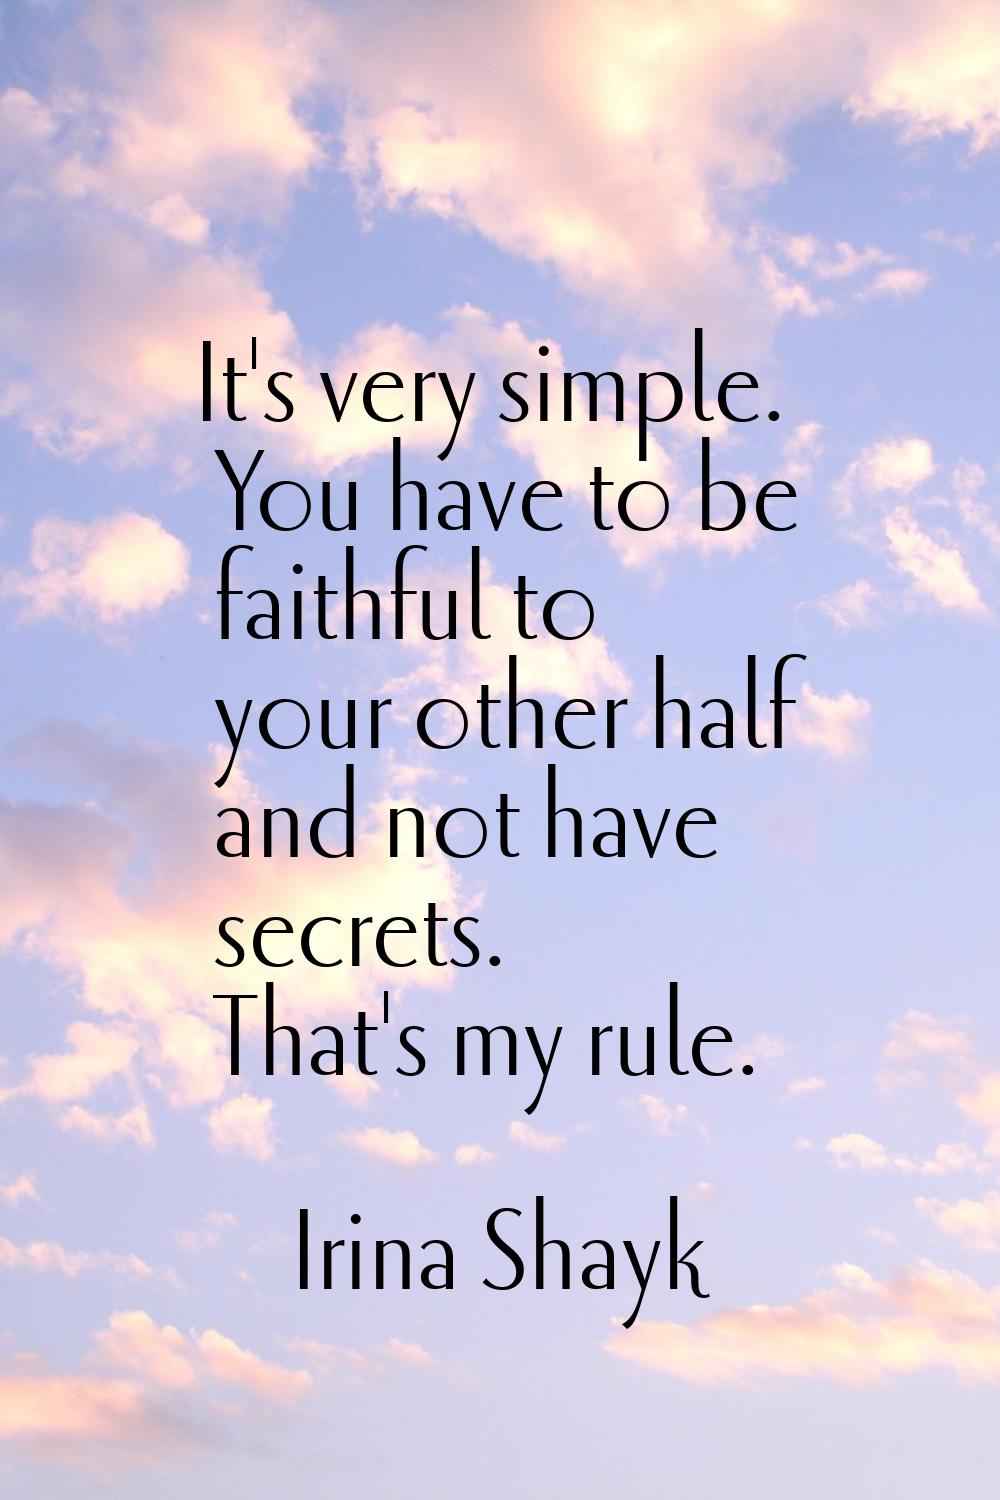 It's very simple. You have to be faithful to your other half and not have secrets. That's my rule.